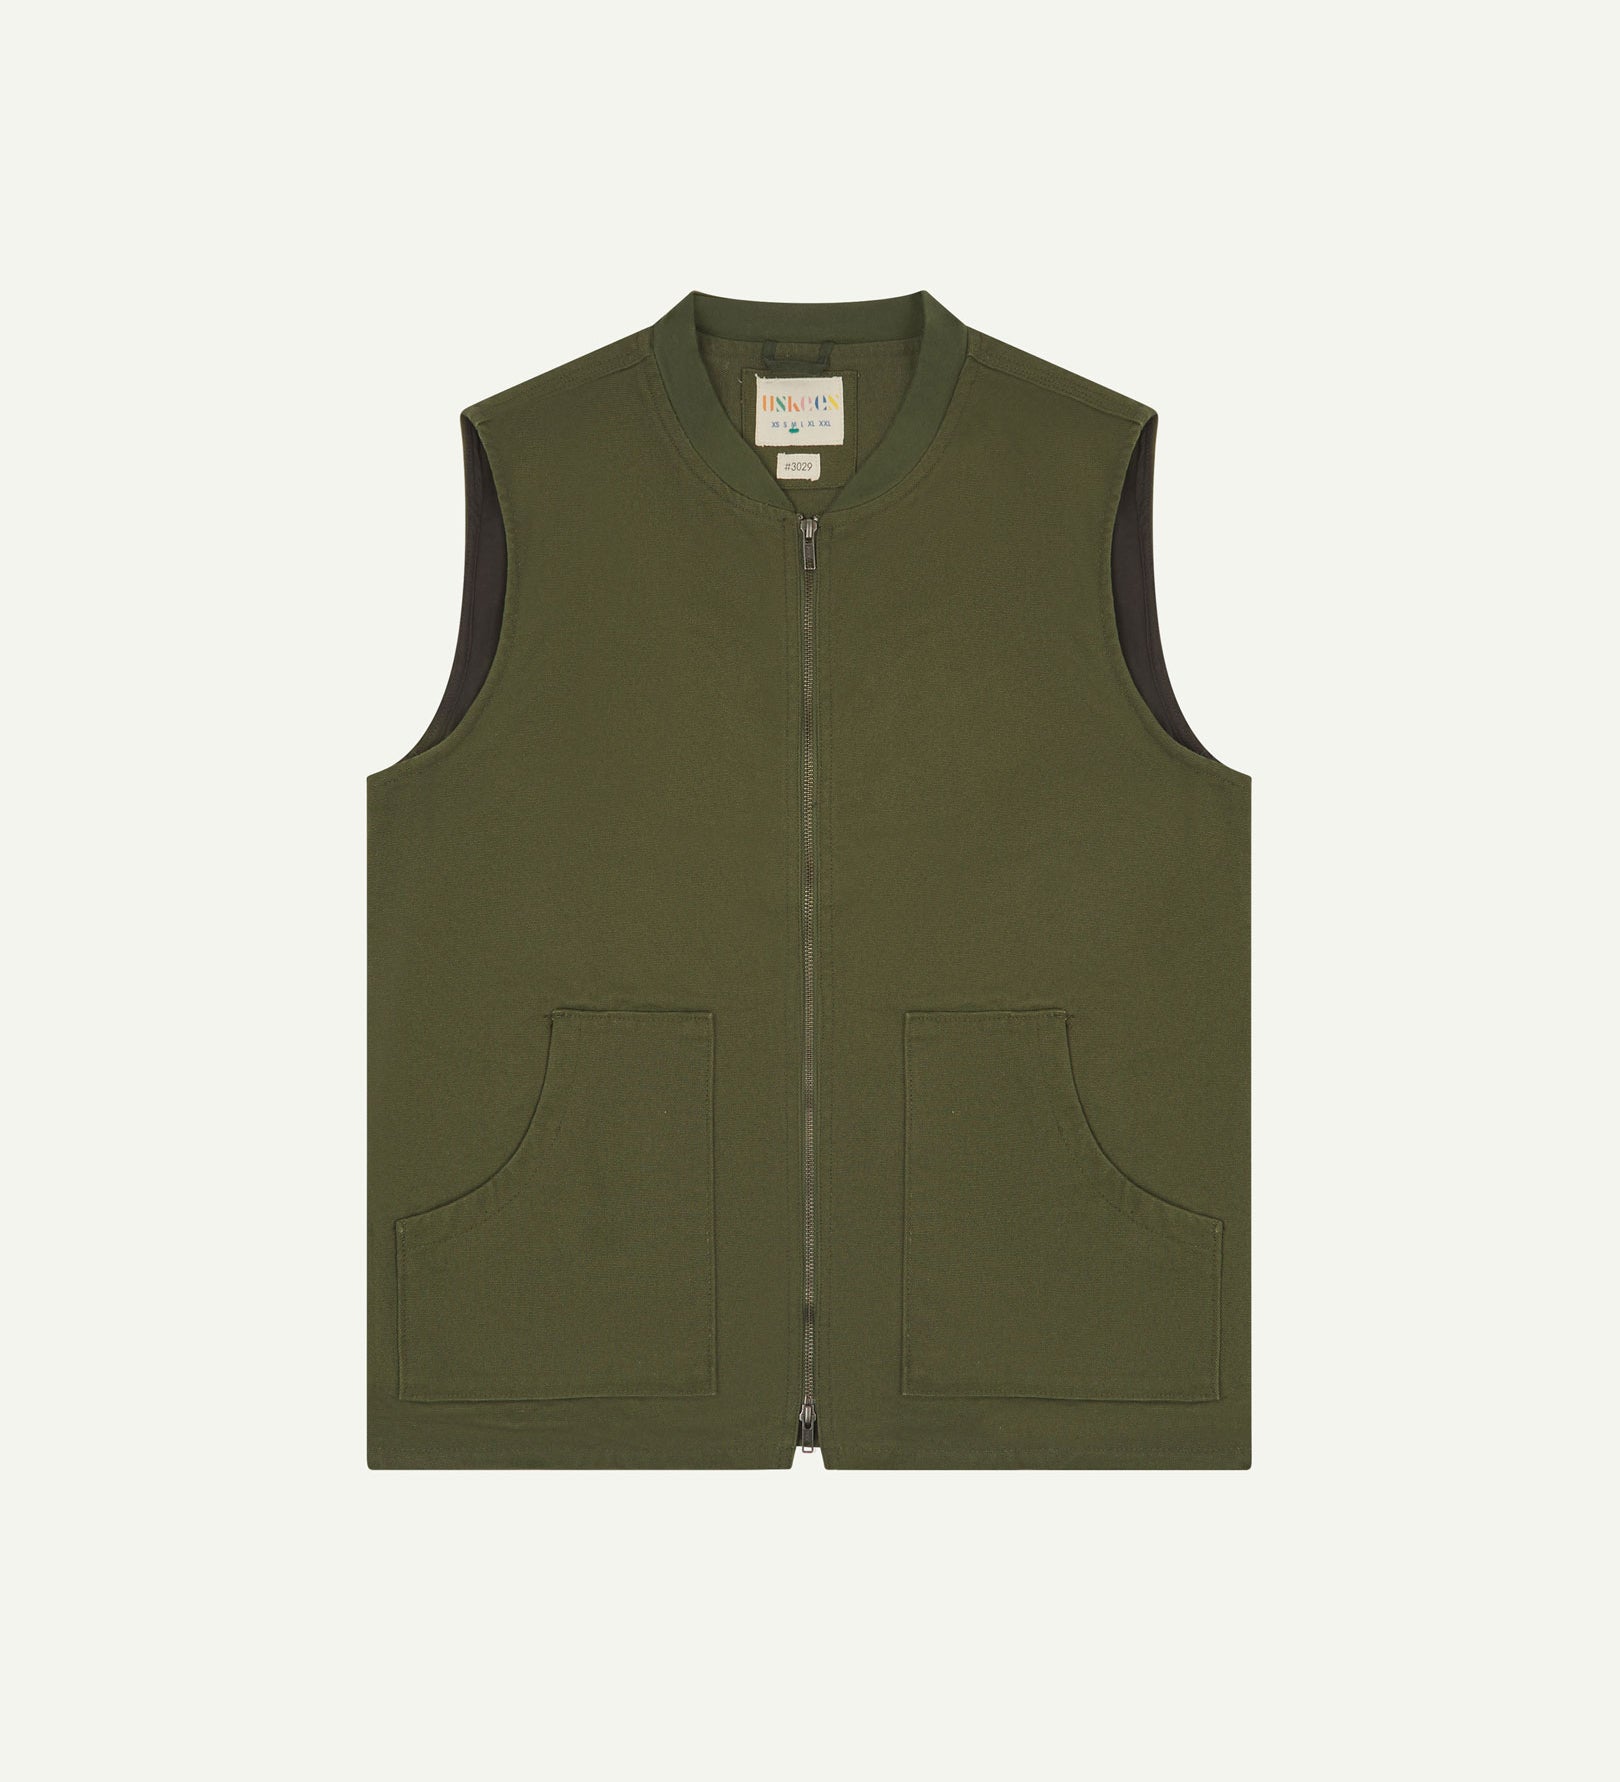 Front flat shot of Uskees coriander green gilet-type zip front waistcoat showing the front patch pockets and inner brand label at neck.